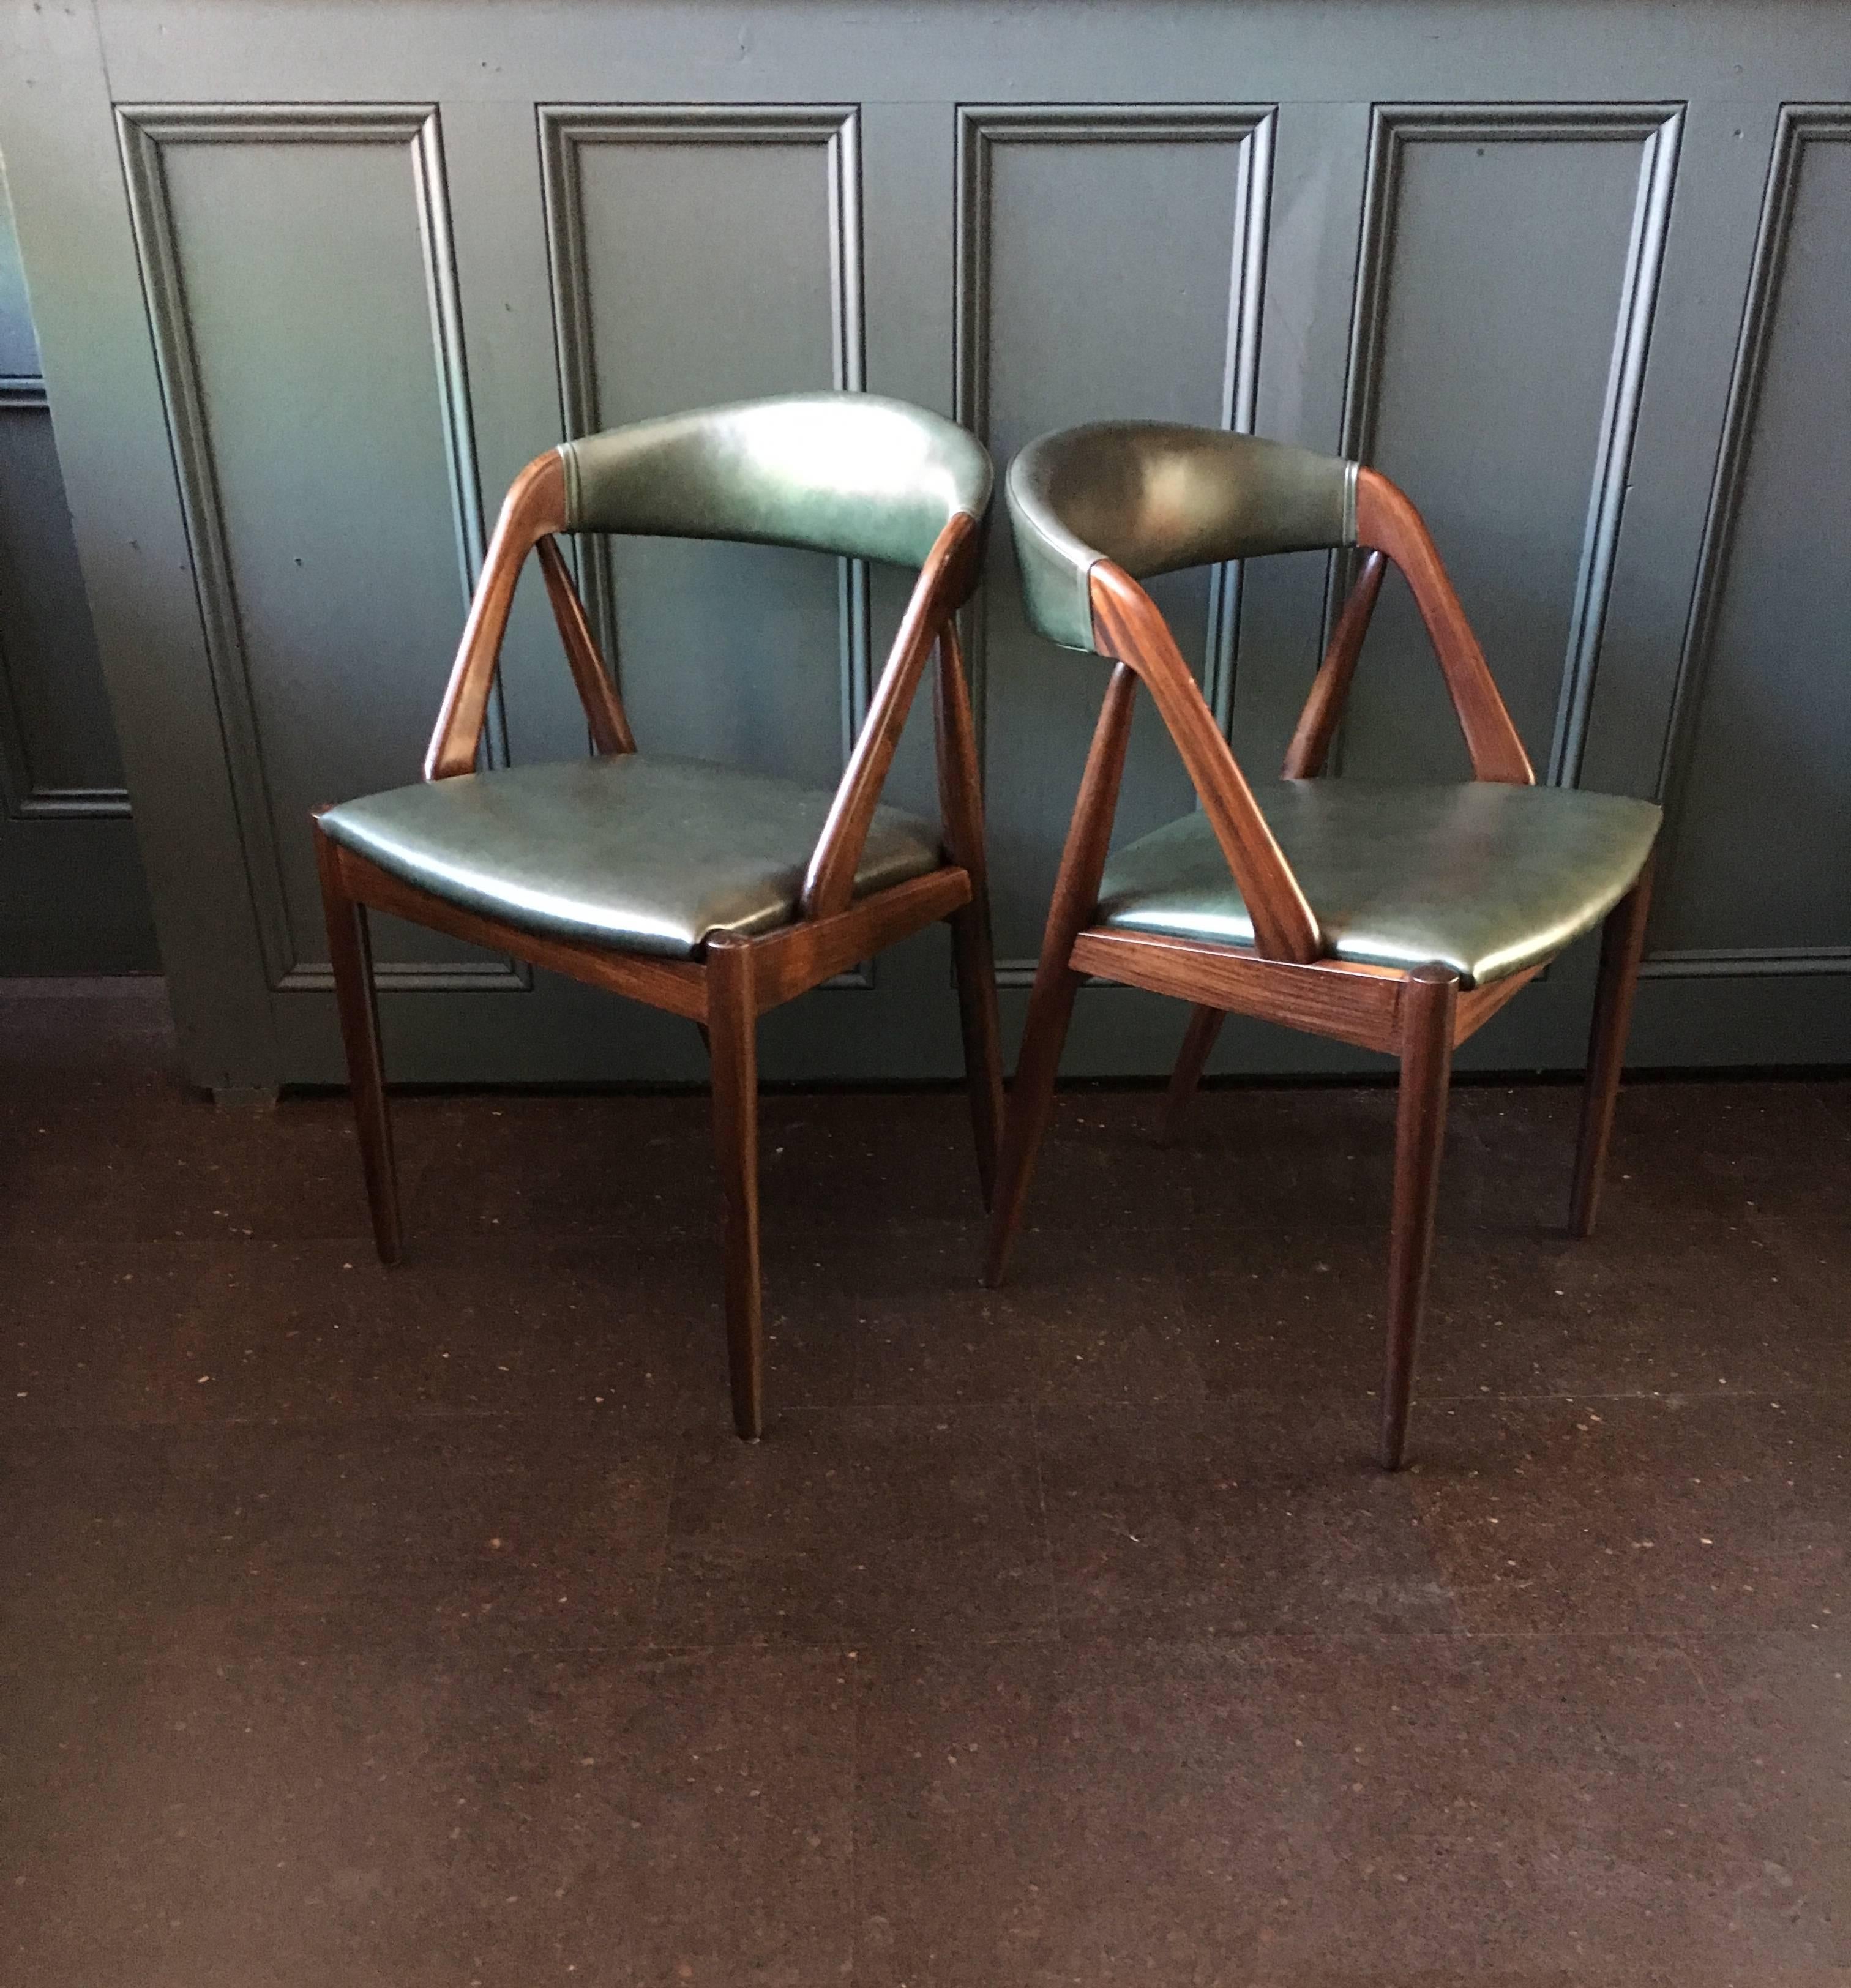 Set of four, professionally reupholstered in deep green Italian leather, Kai Kristiansen model 31 chairs. Repolished very dark teak frames. Produced by Schou Andersen, Denmark, 1960s.
 Insured worldwide shipping 